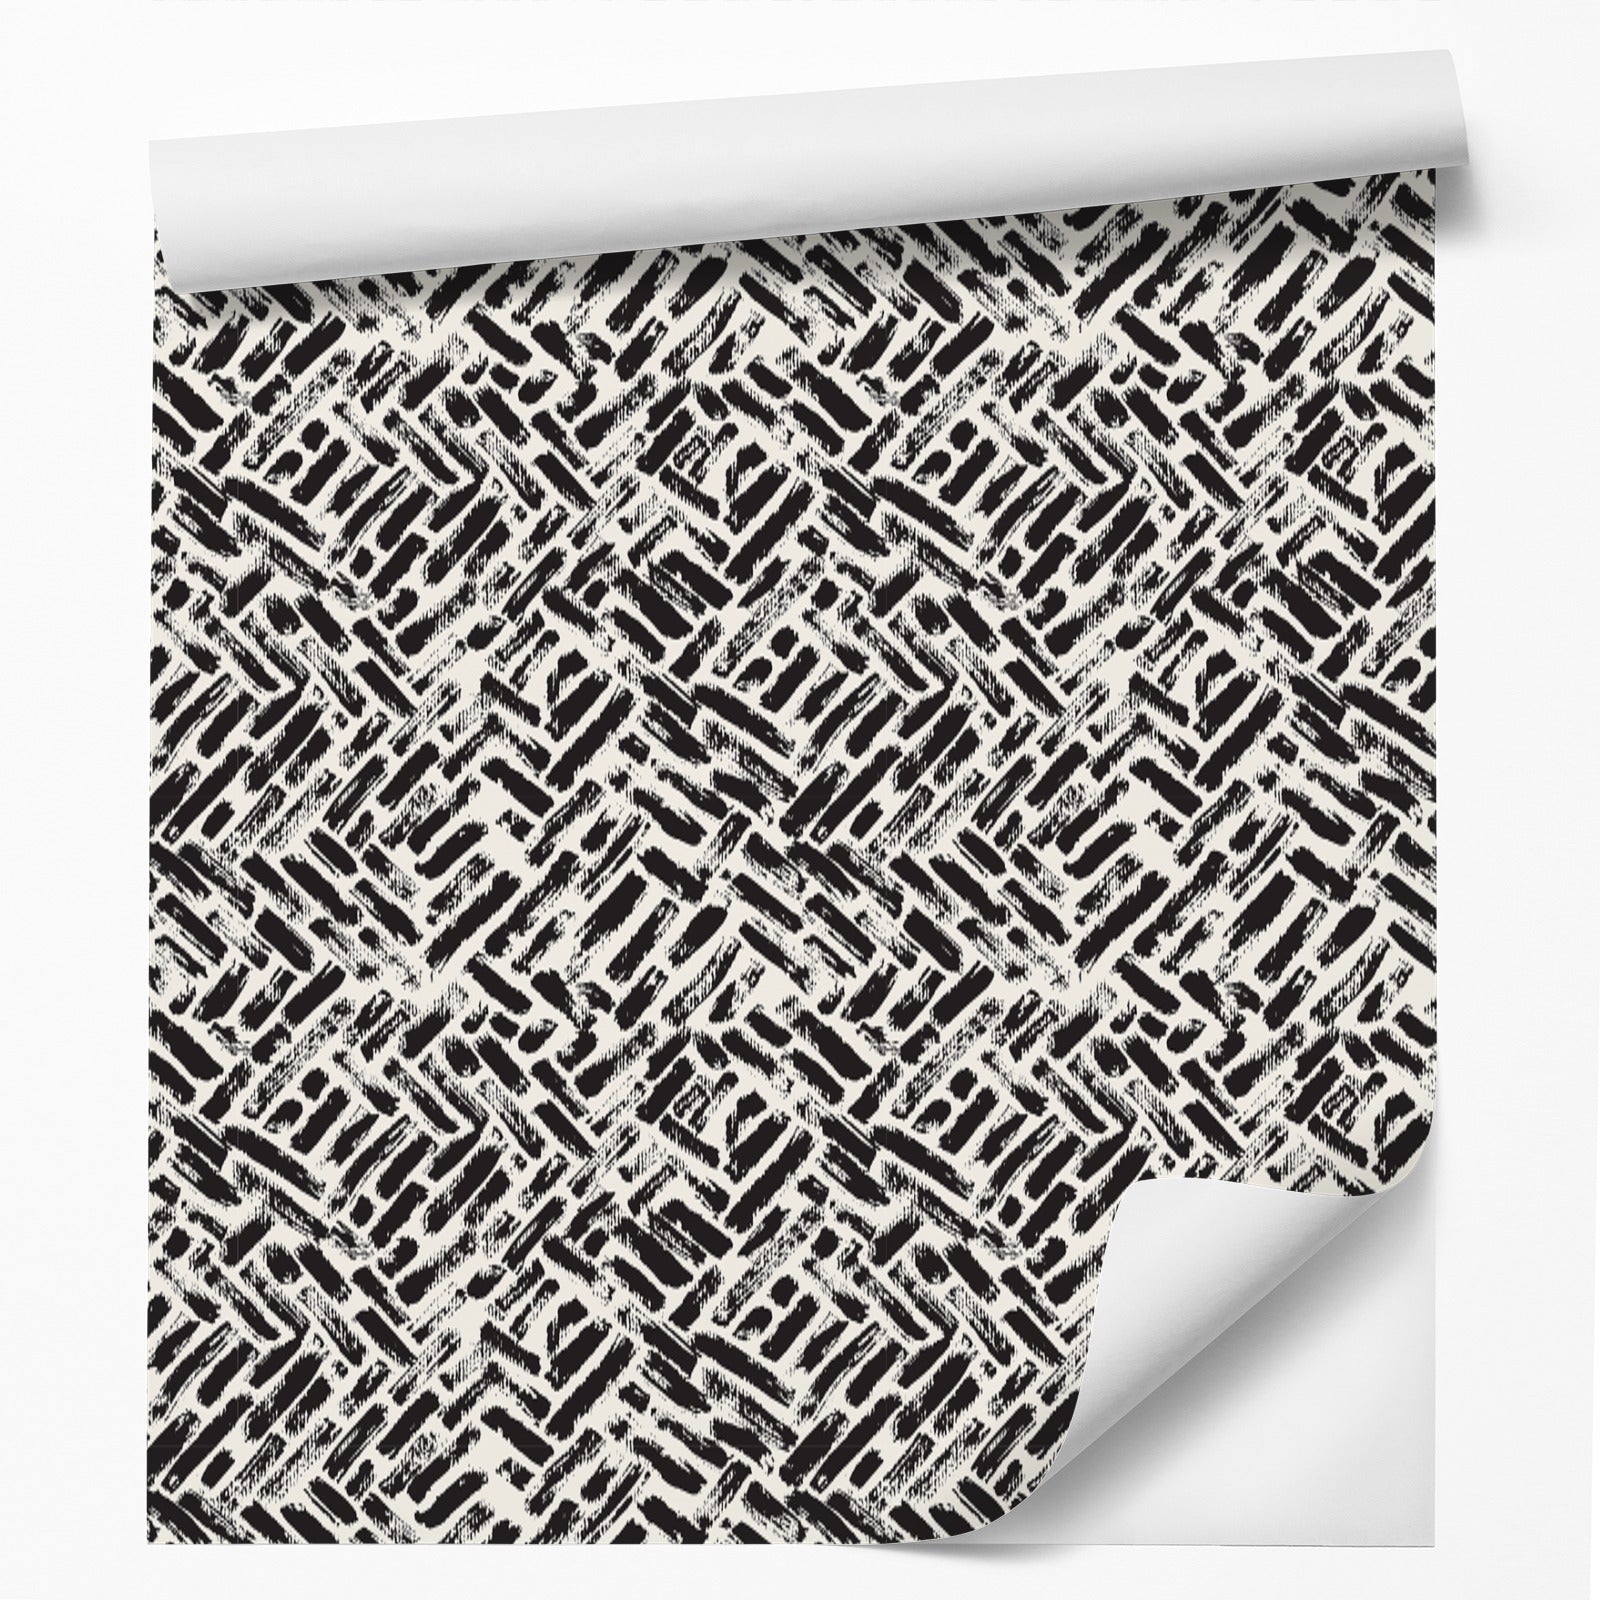 18' L x 24" W Peel & Stick Wallpaper Roll - Abstract Basketweave by DecoWorks - Wallpaper - Americanflat